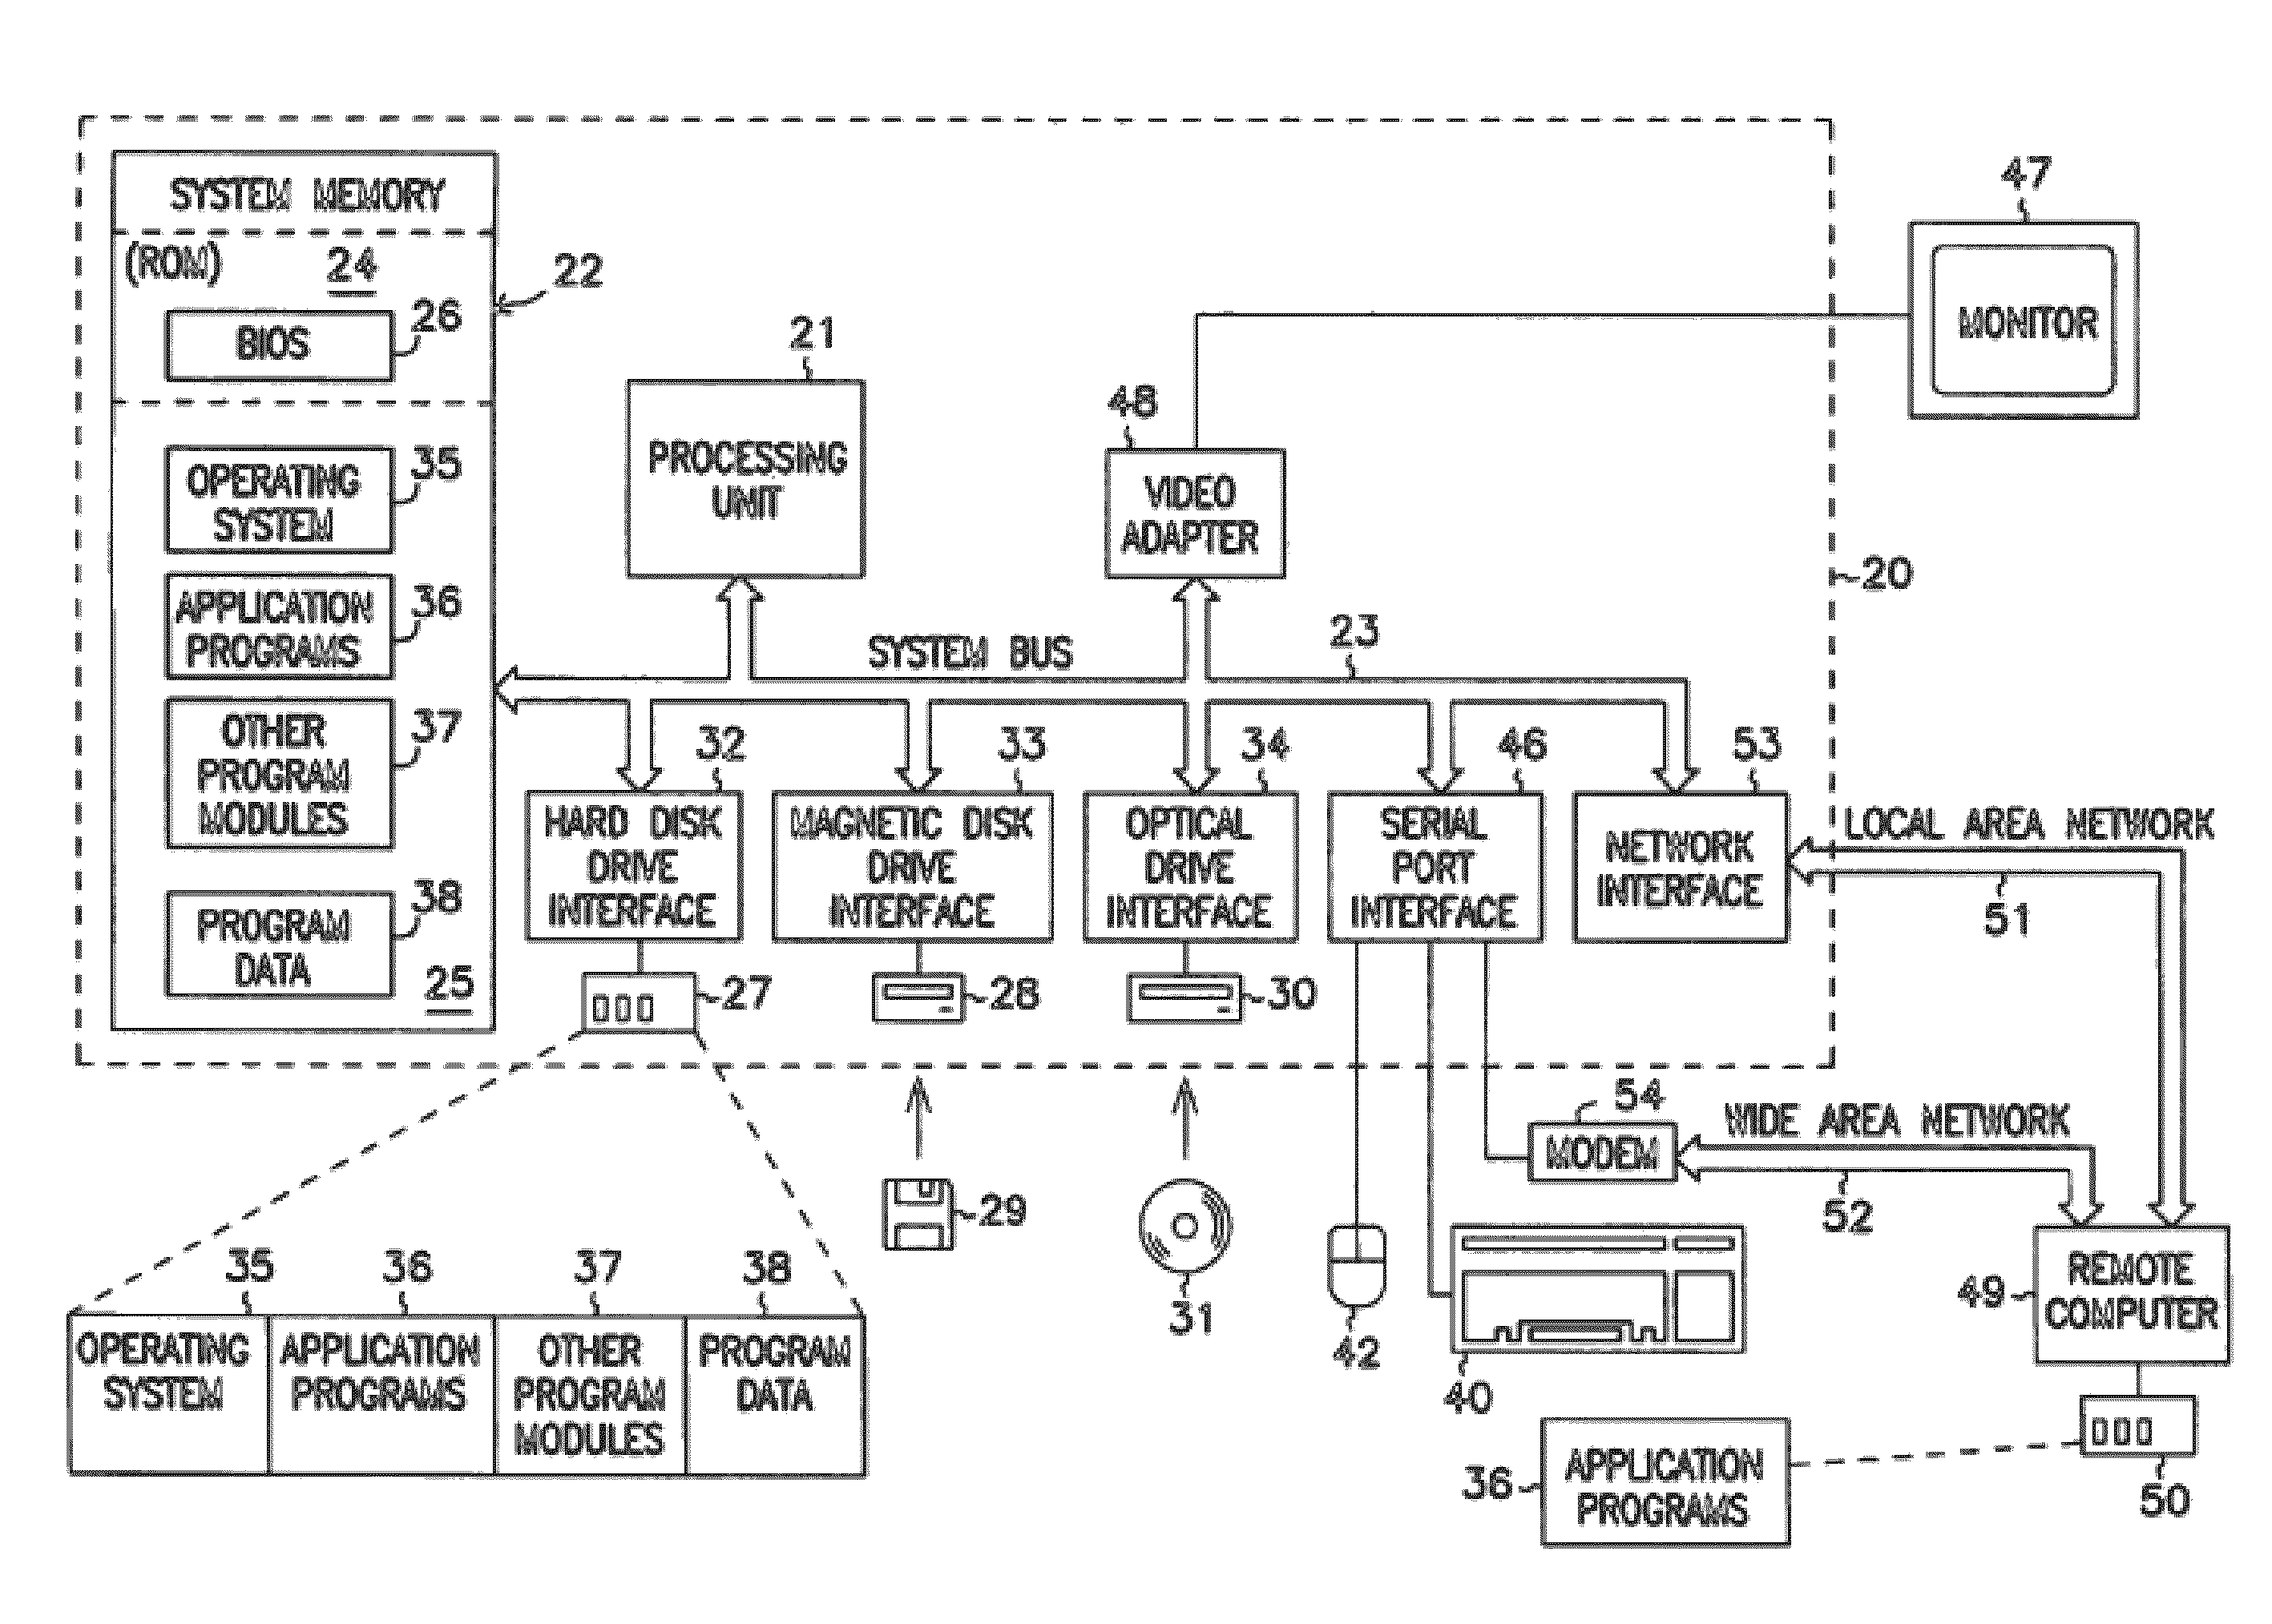 Efficient method for the scheduling of work loads in a multi-core computing environment